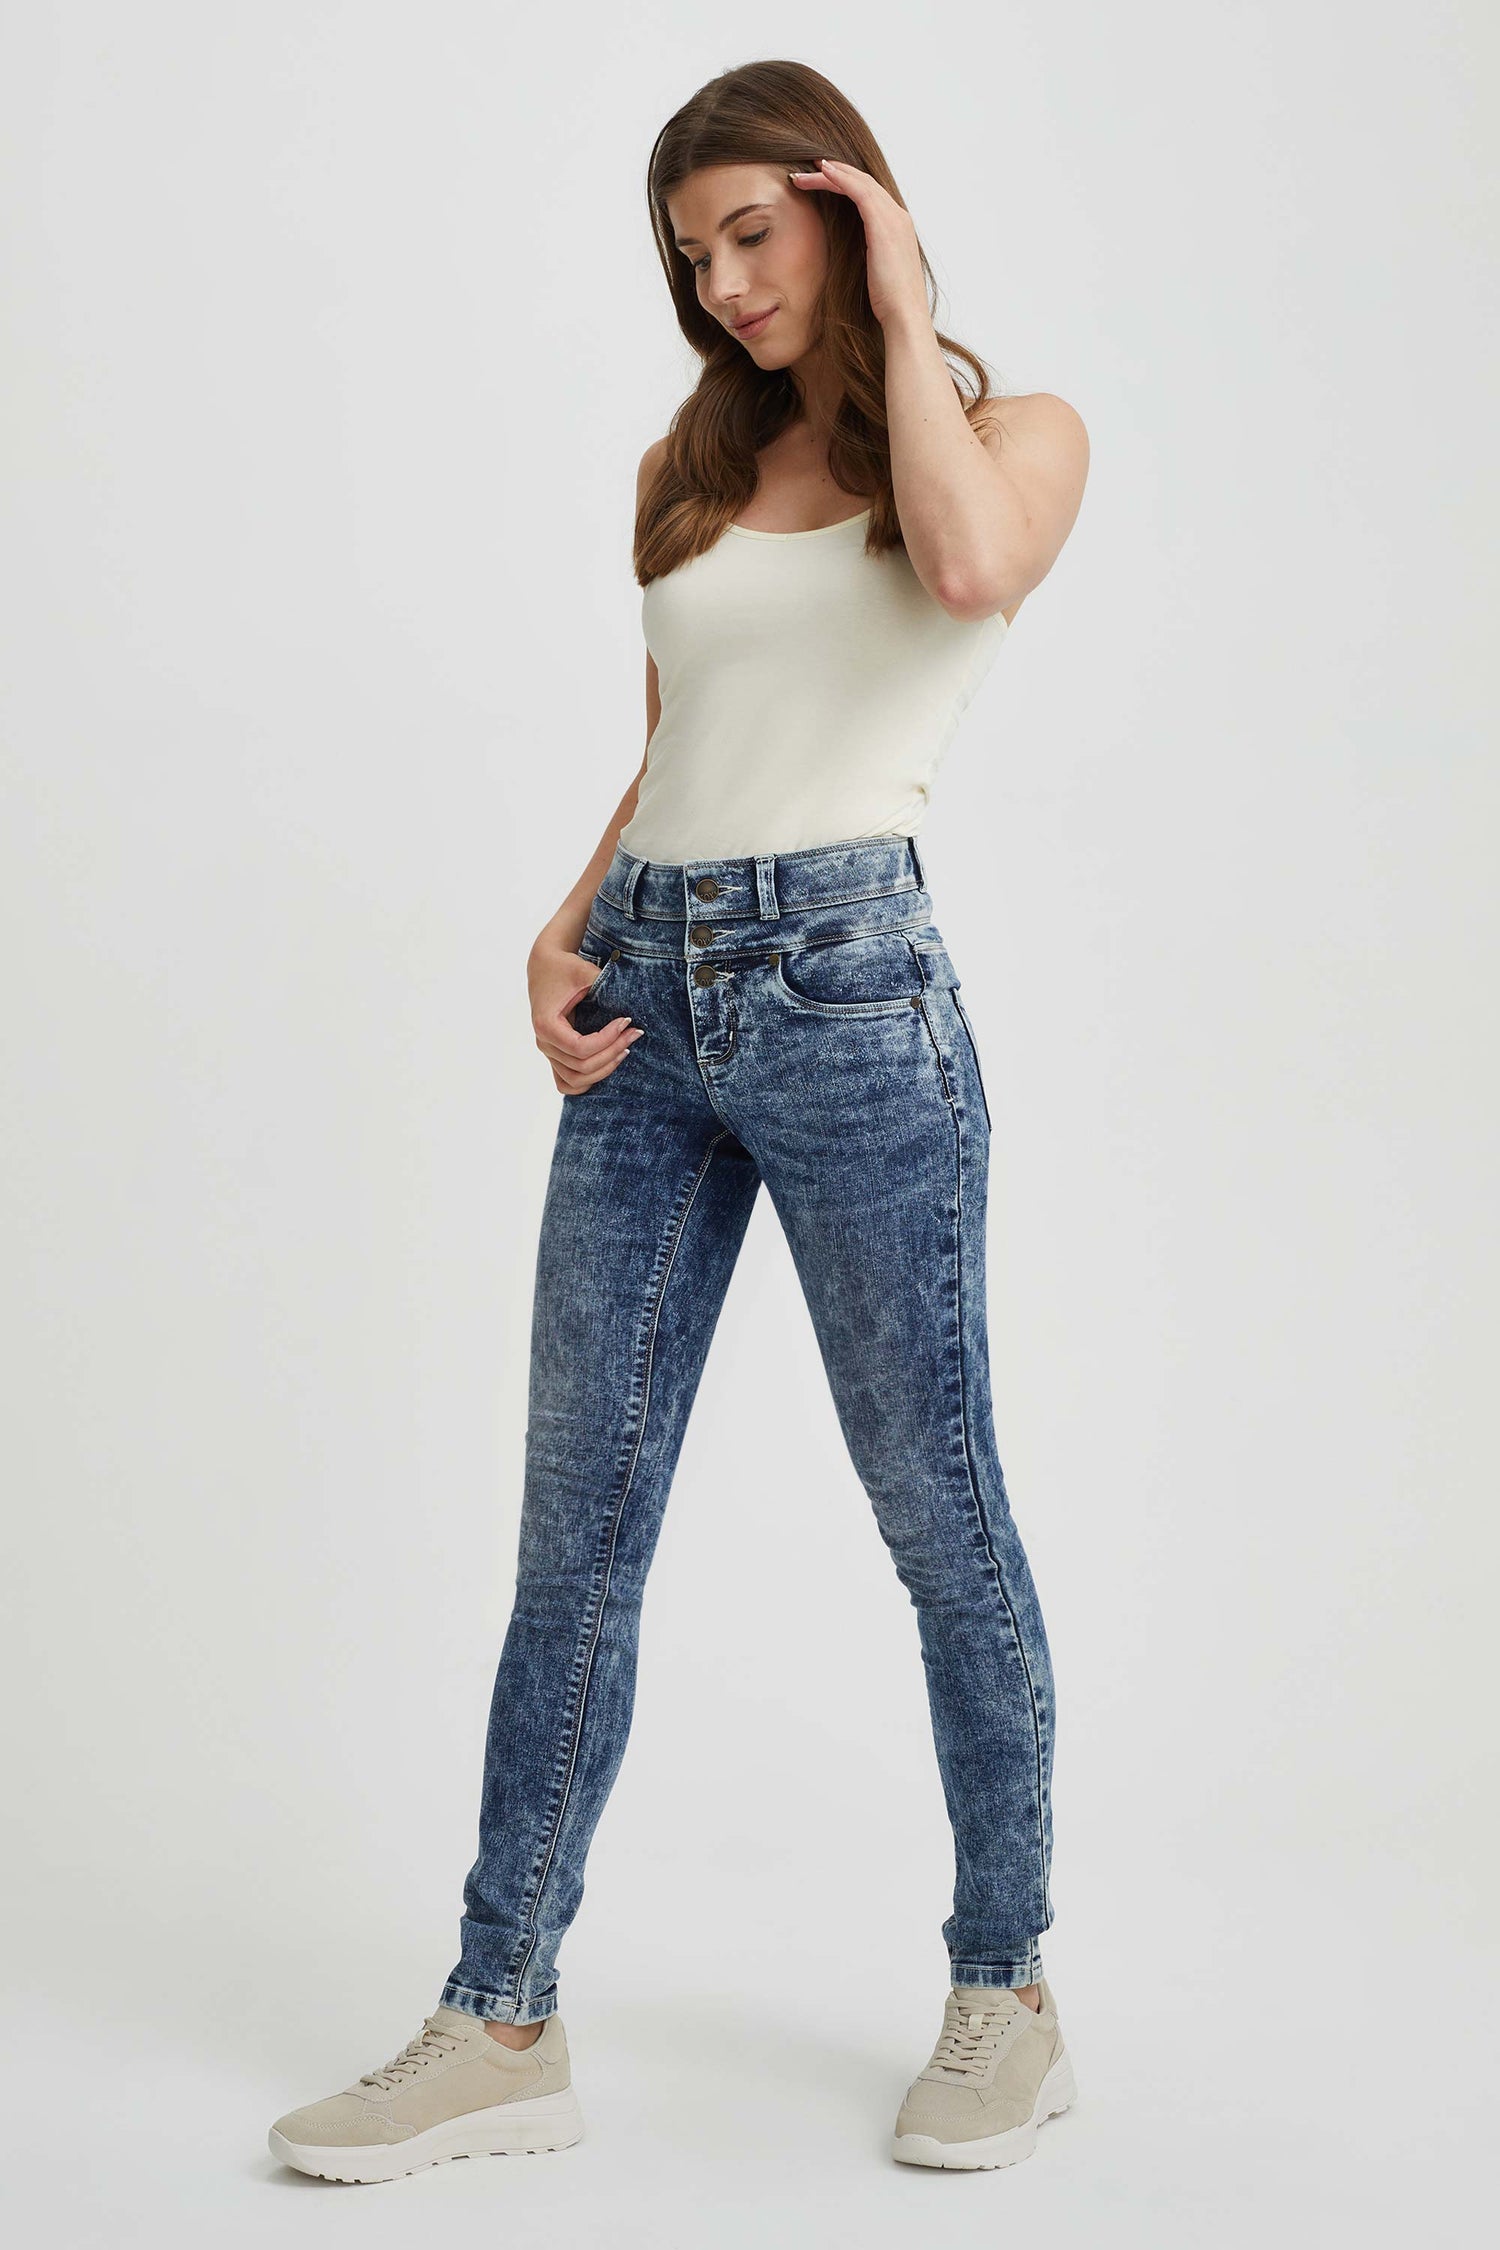 High Waisted Skinny Jeans for Women